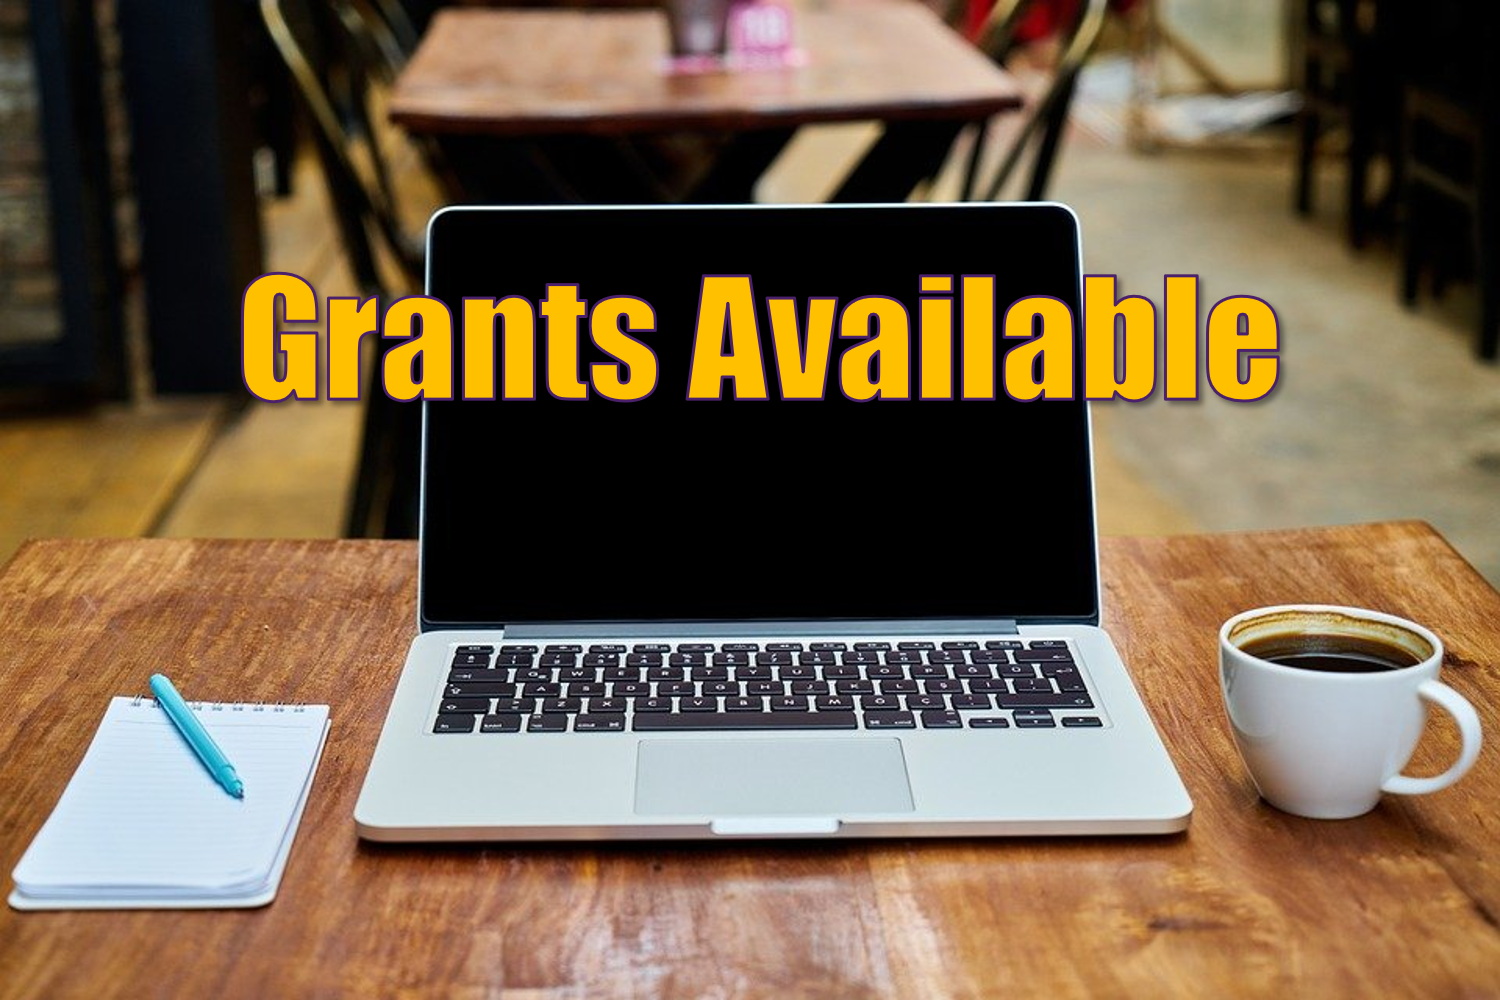 Grants Available